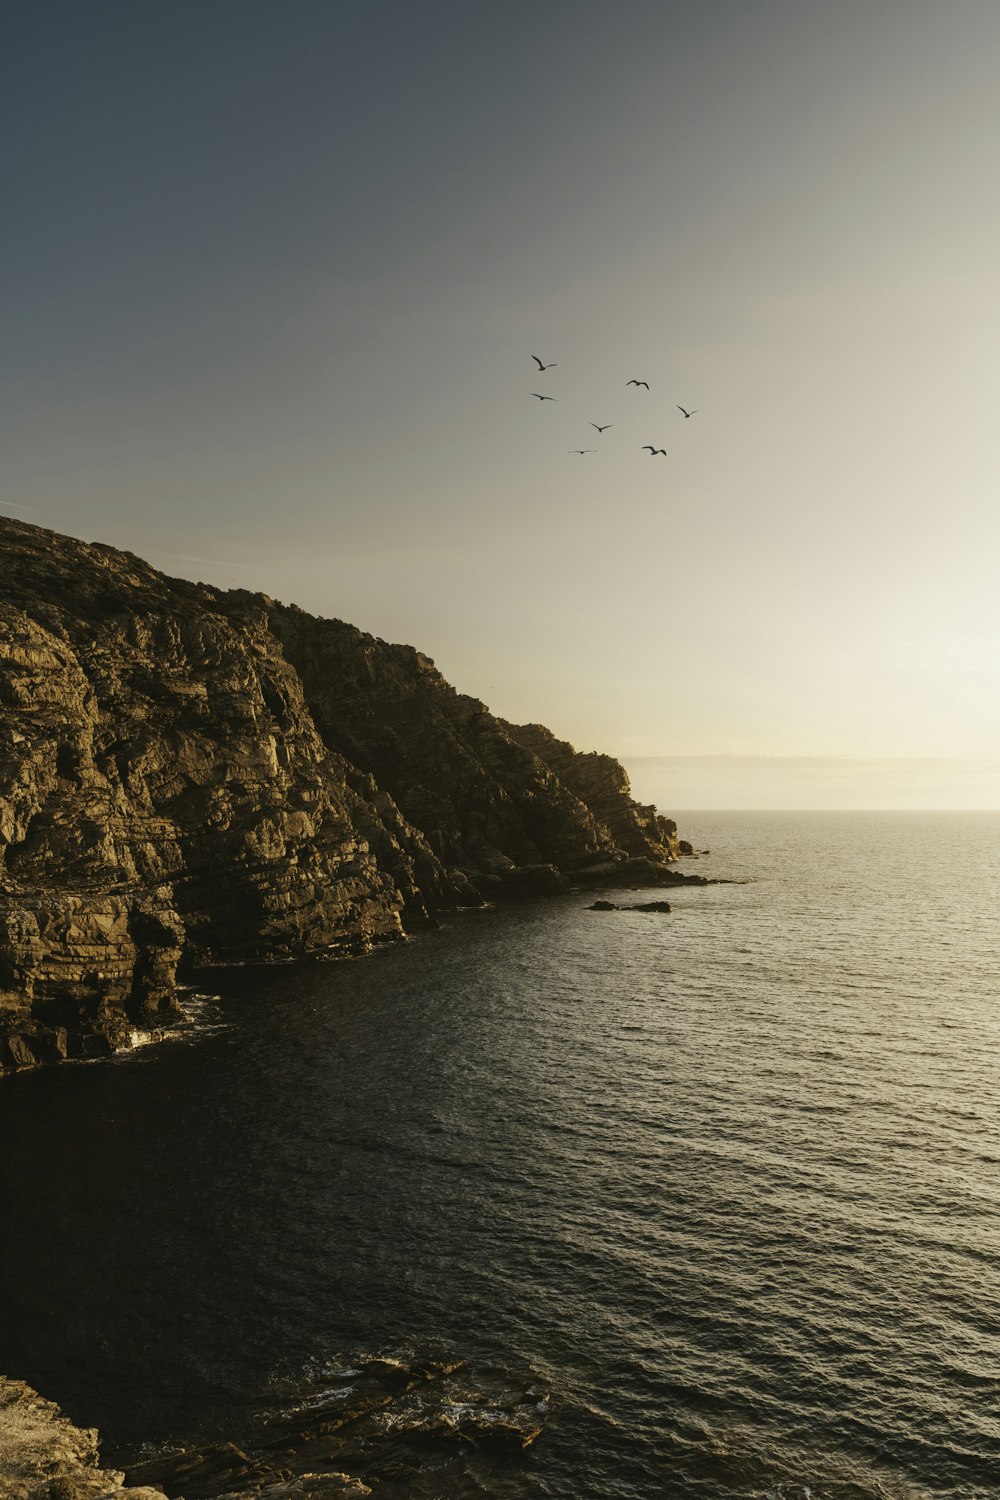 birds flying over the water at the edge of a cliff